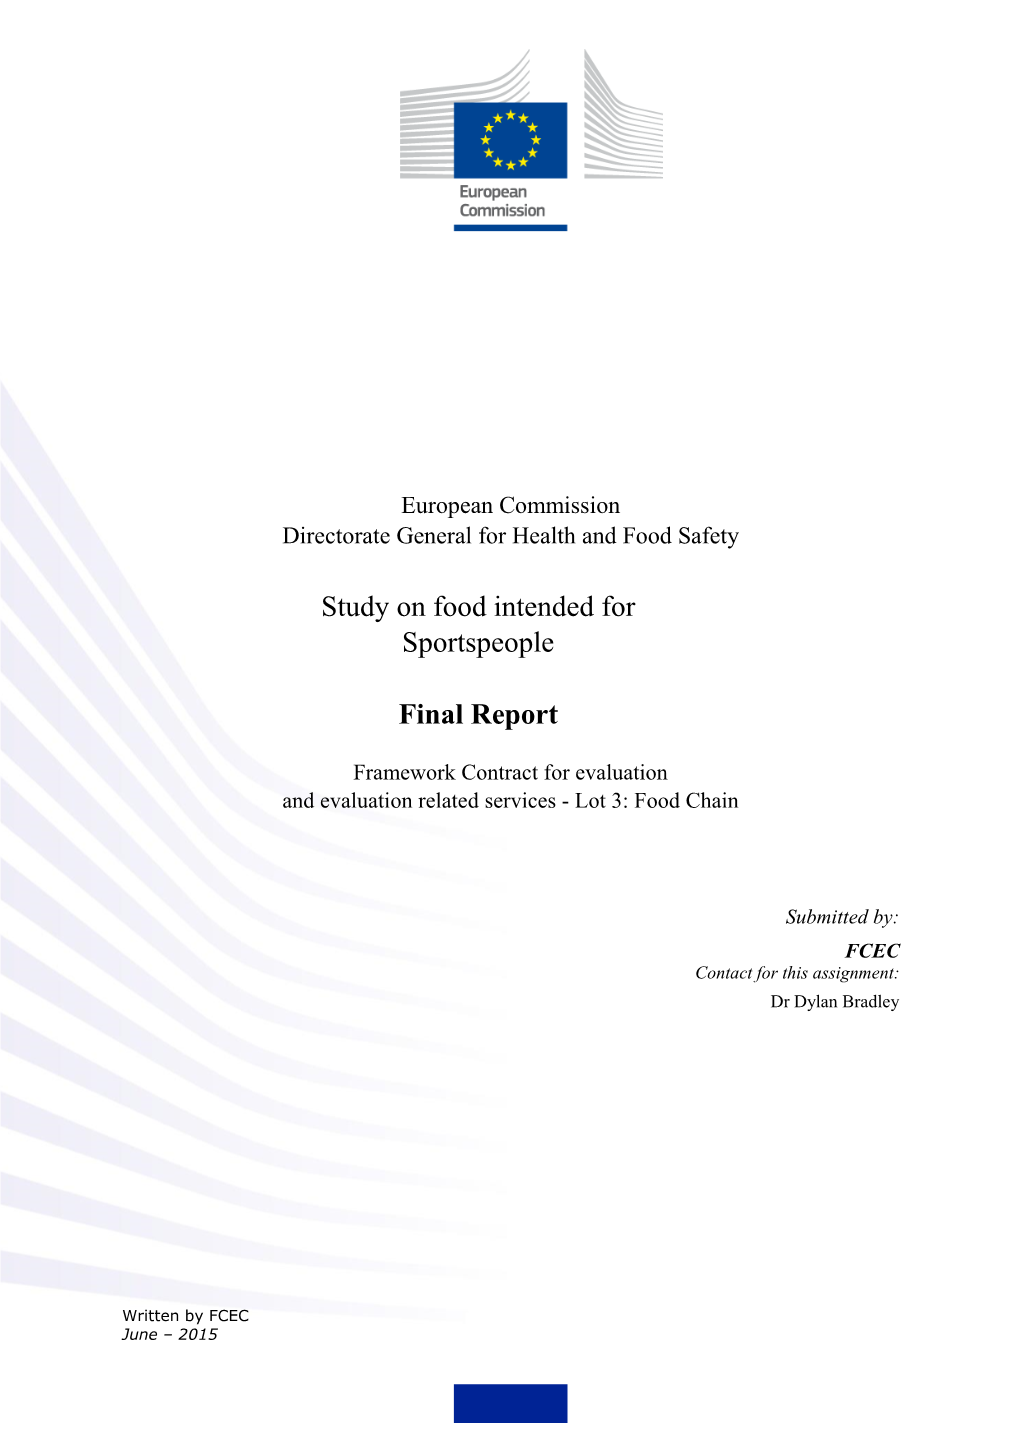 Study on Food Intended for Sportspeople Final Report